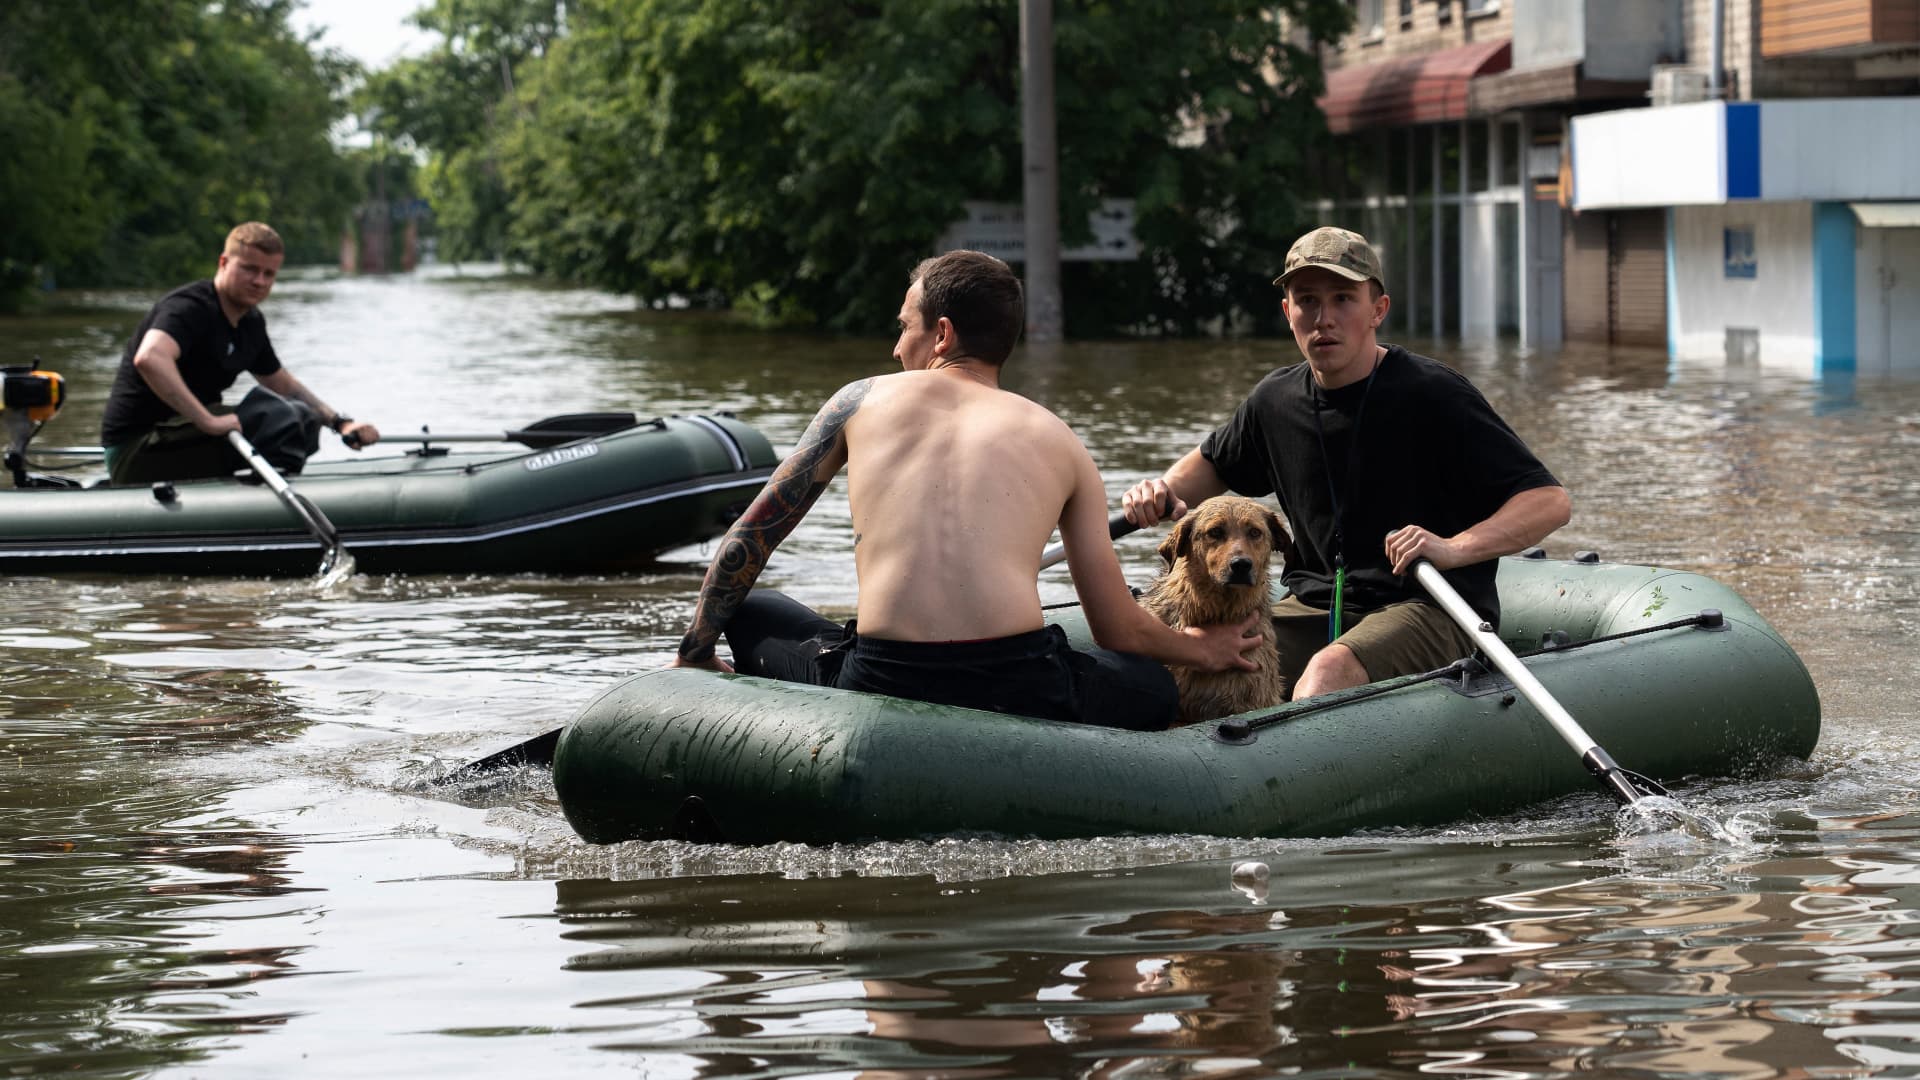 Volunteers carry local residents on inflatable boats during an evacuation from a flooded area in Kherson on June 8, 2023, following damages sustained at Kakhovka hydroelectric power plant dam. Ukrainian President Volodymyr Zelenskyy visited the region flooded by the breached Kakhovka dam on June 8, 2023, as the regional governor said 600 square kilometres were underwater. 